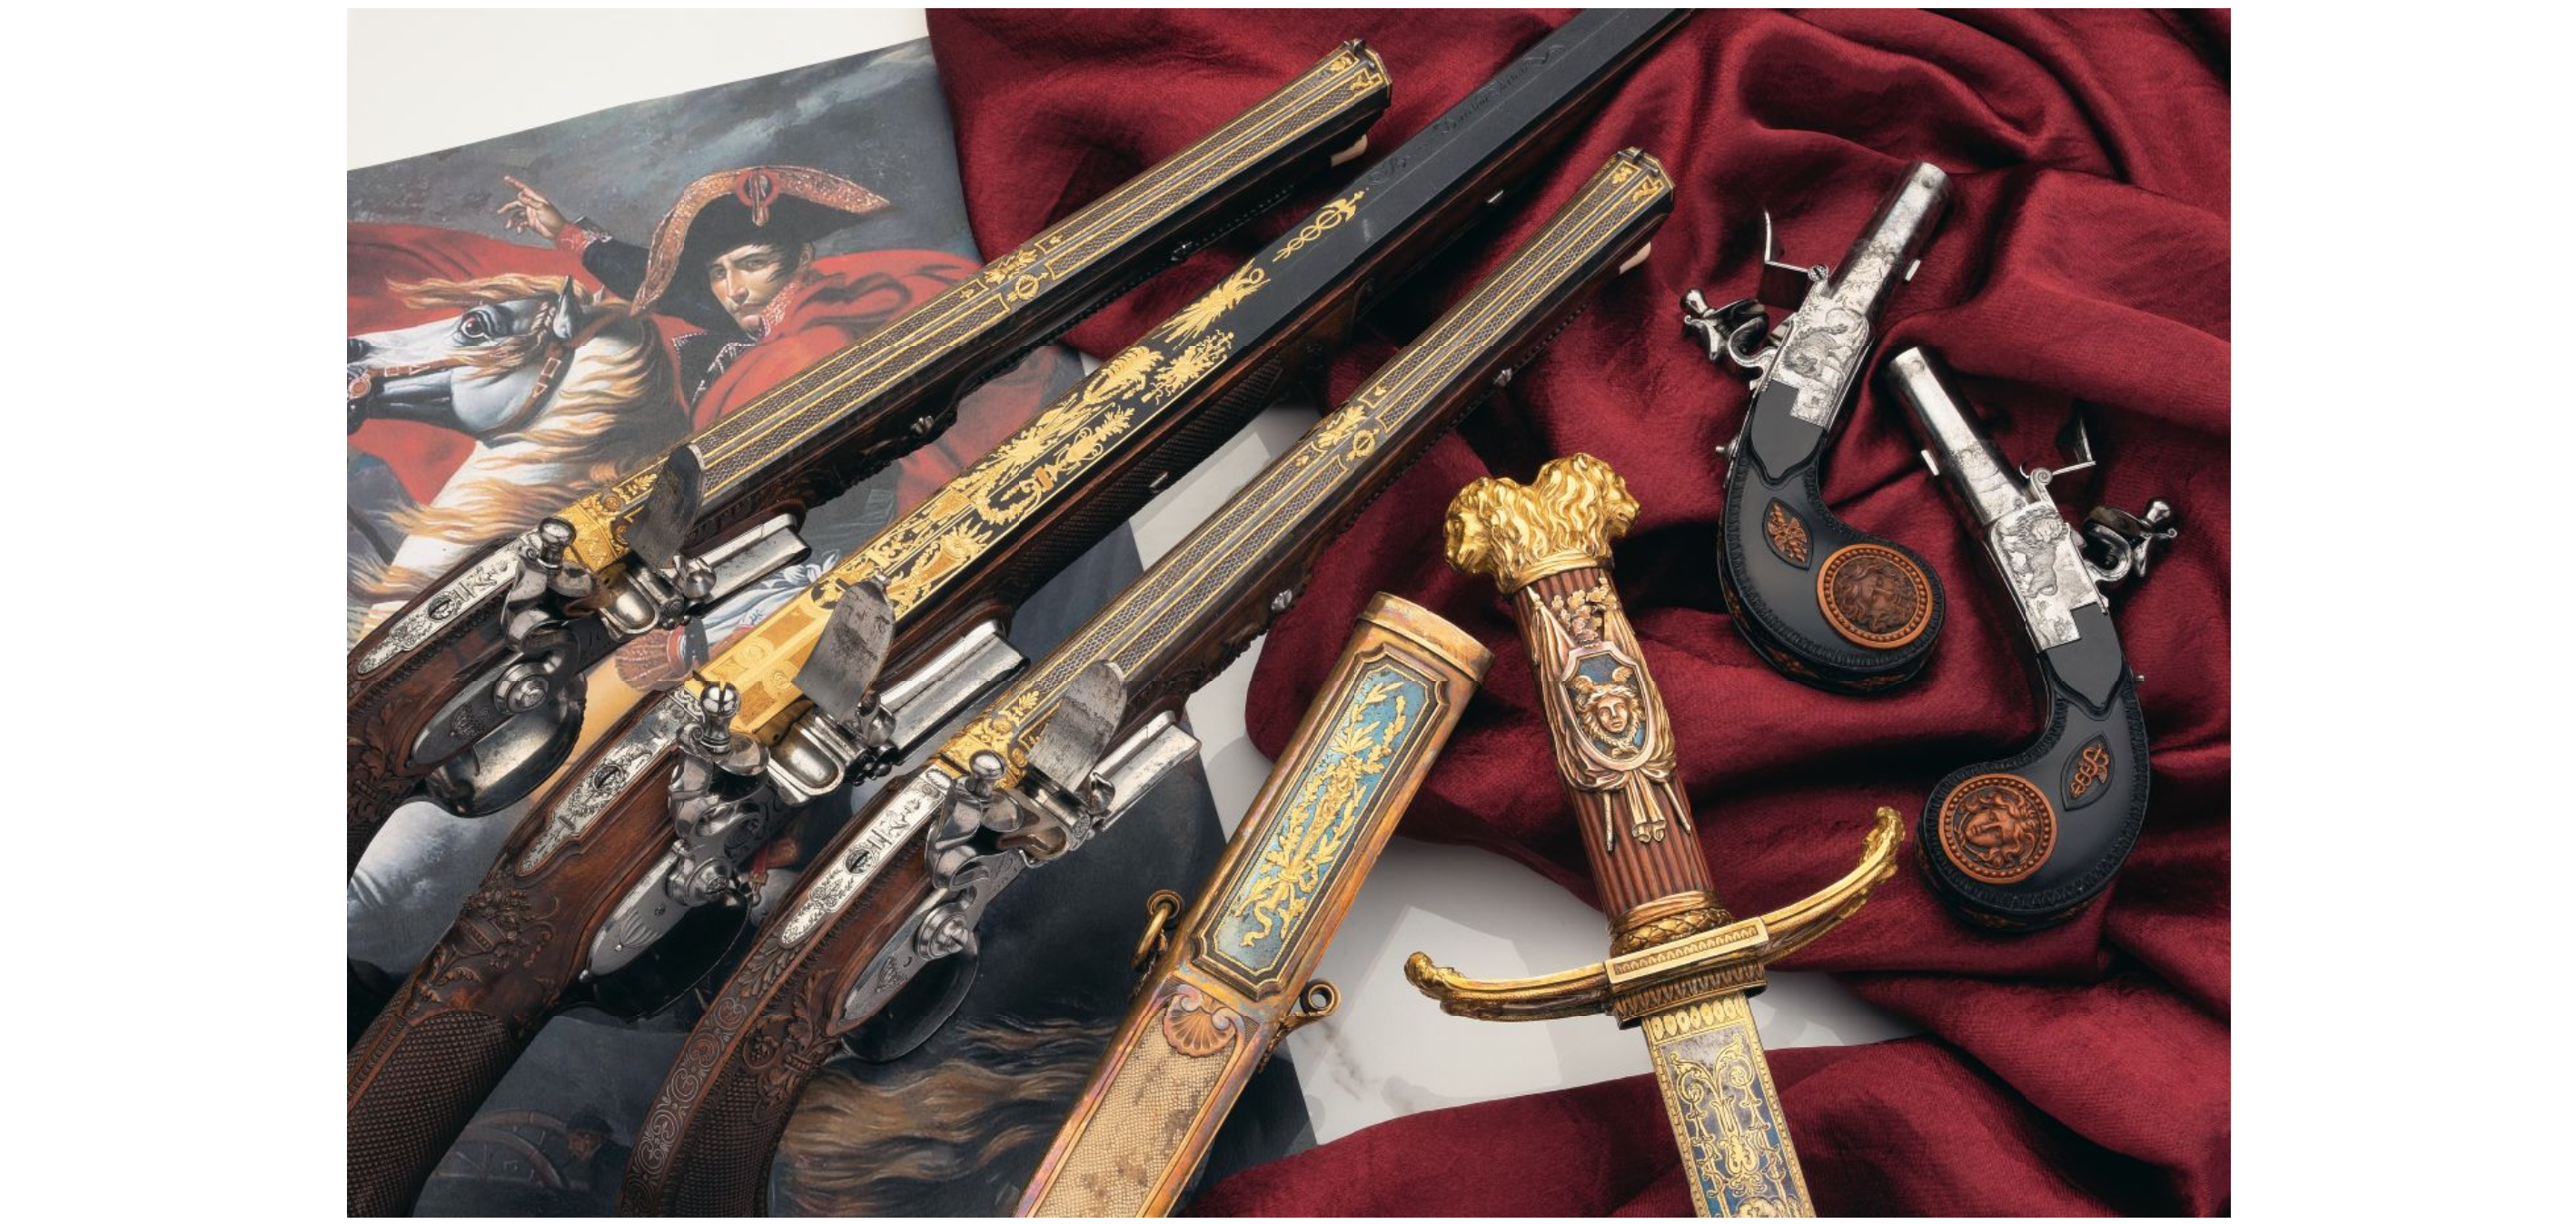 These firearms once belonged to French emperor Napoleon.